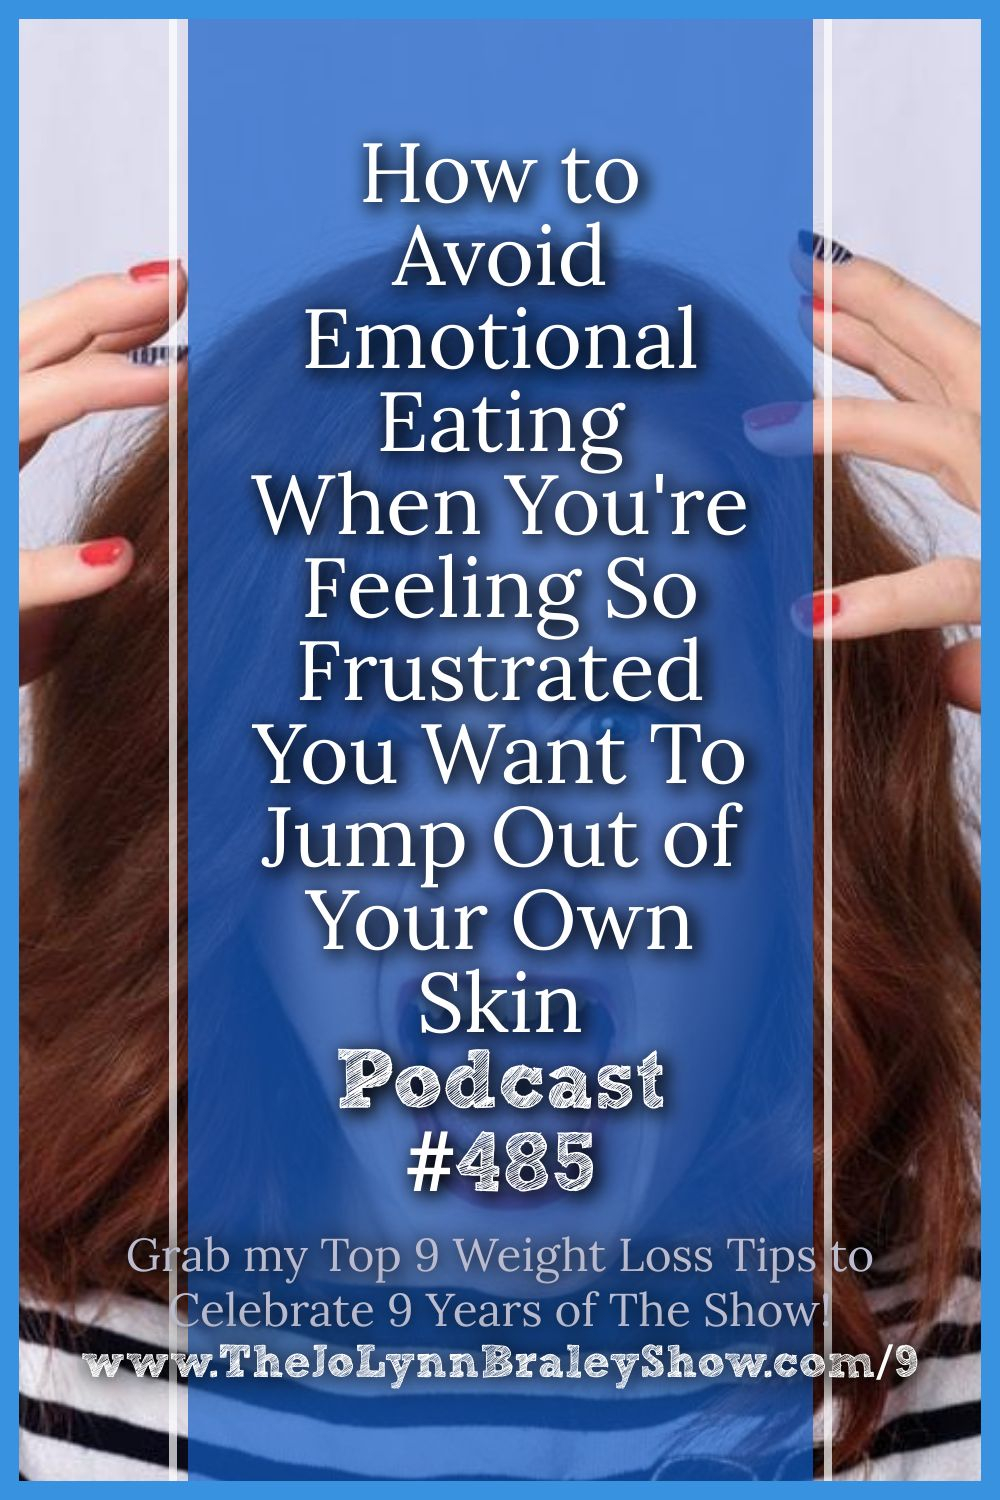 How to Avoid Emotional Eating When Feeling Extreme Frustration [Podcast #485]